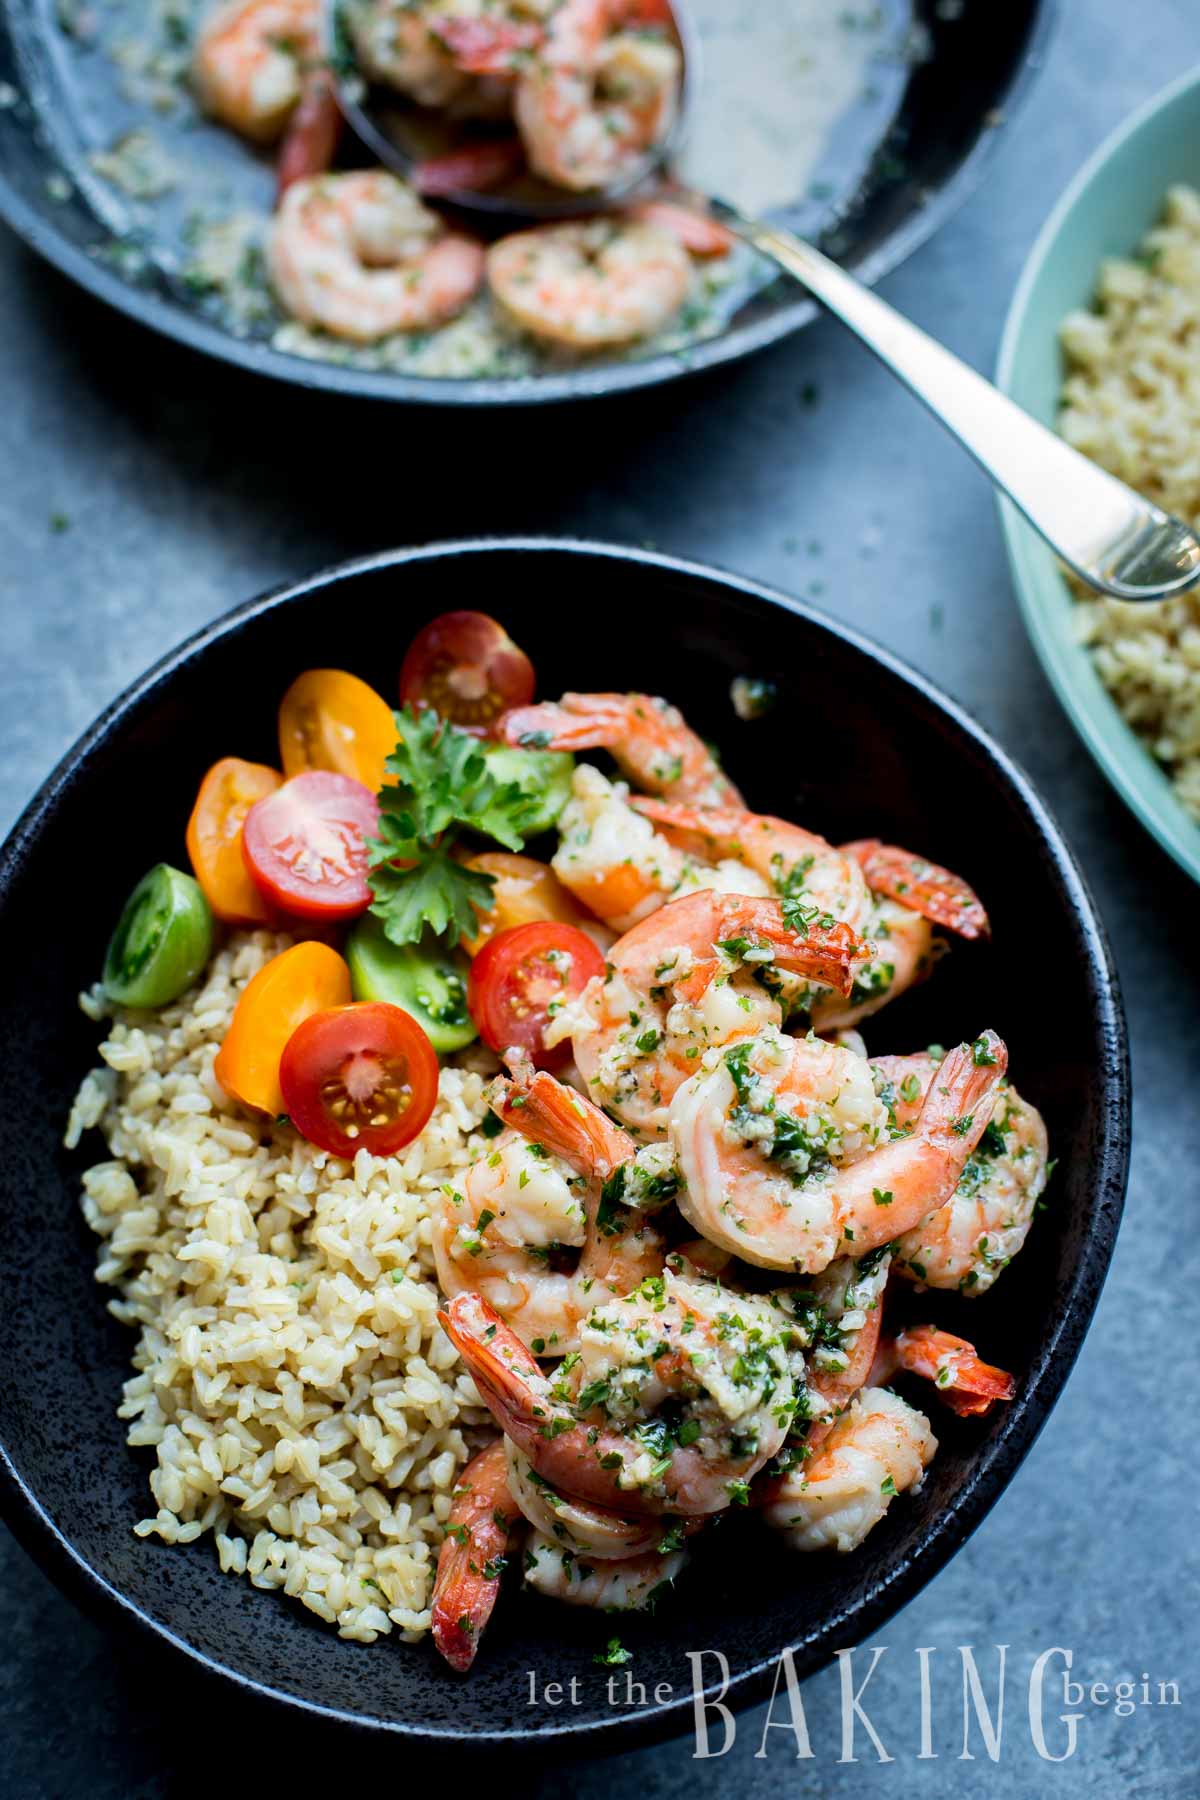 Shrimp scampi in a bowl with quinoa and tomatoes next to a bowl of shrimp.